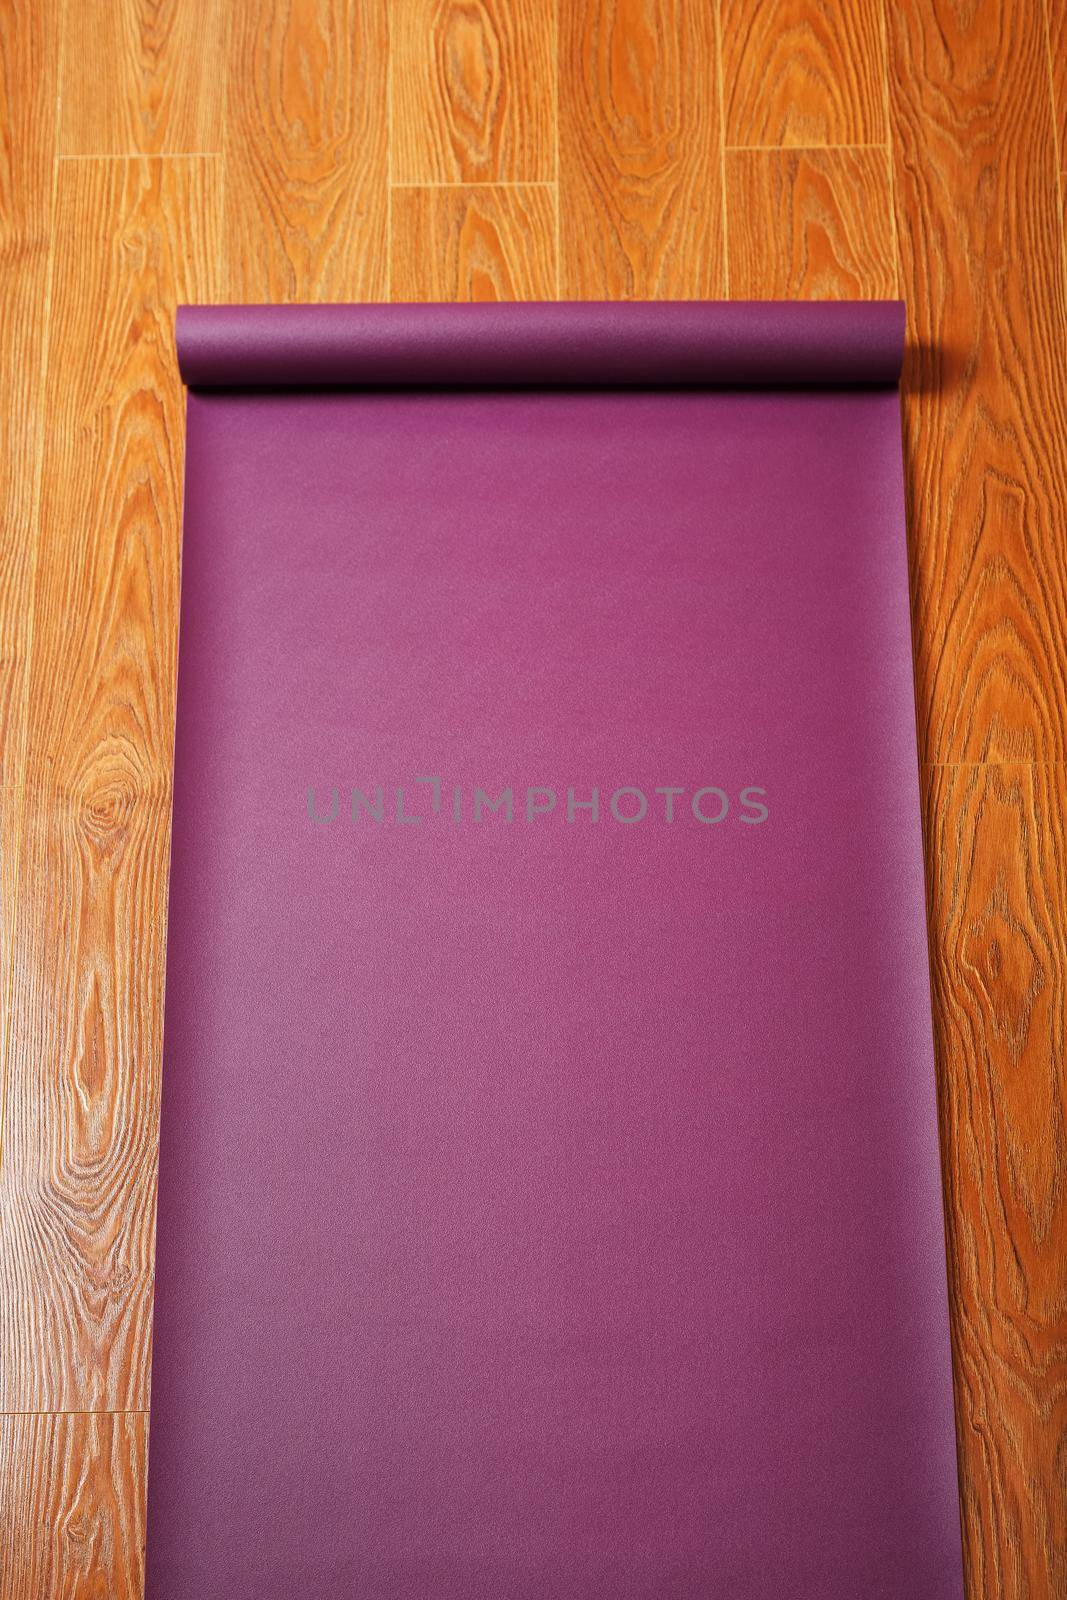 A lilac-colored yoga mat is spread out on the wooden floor with a Ganapati figurine. Top view